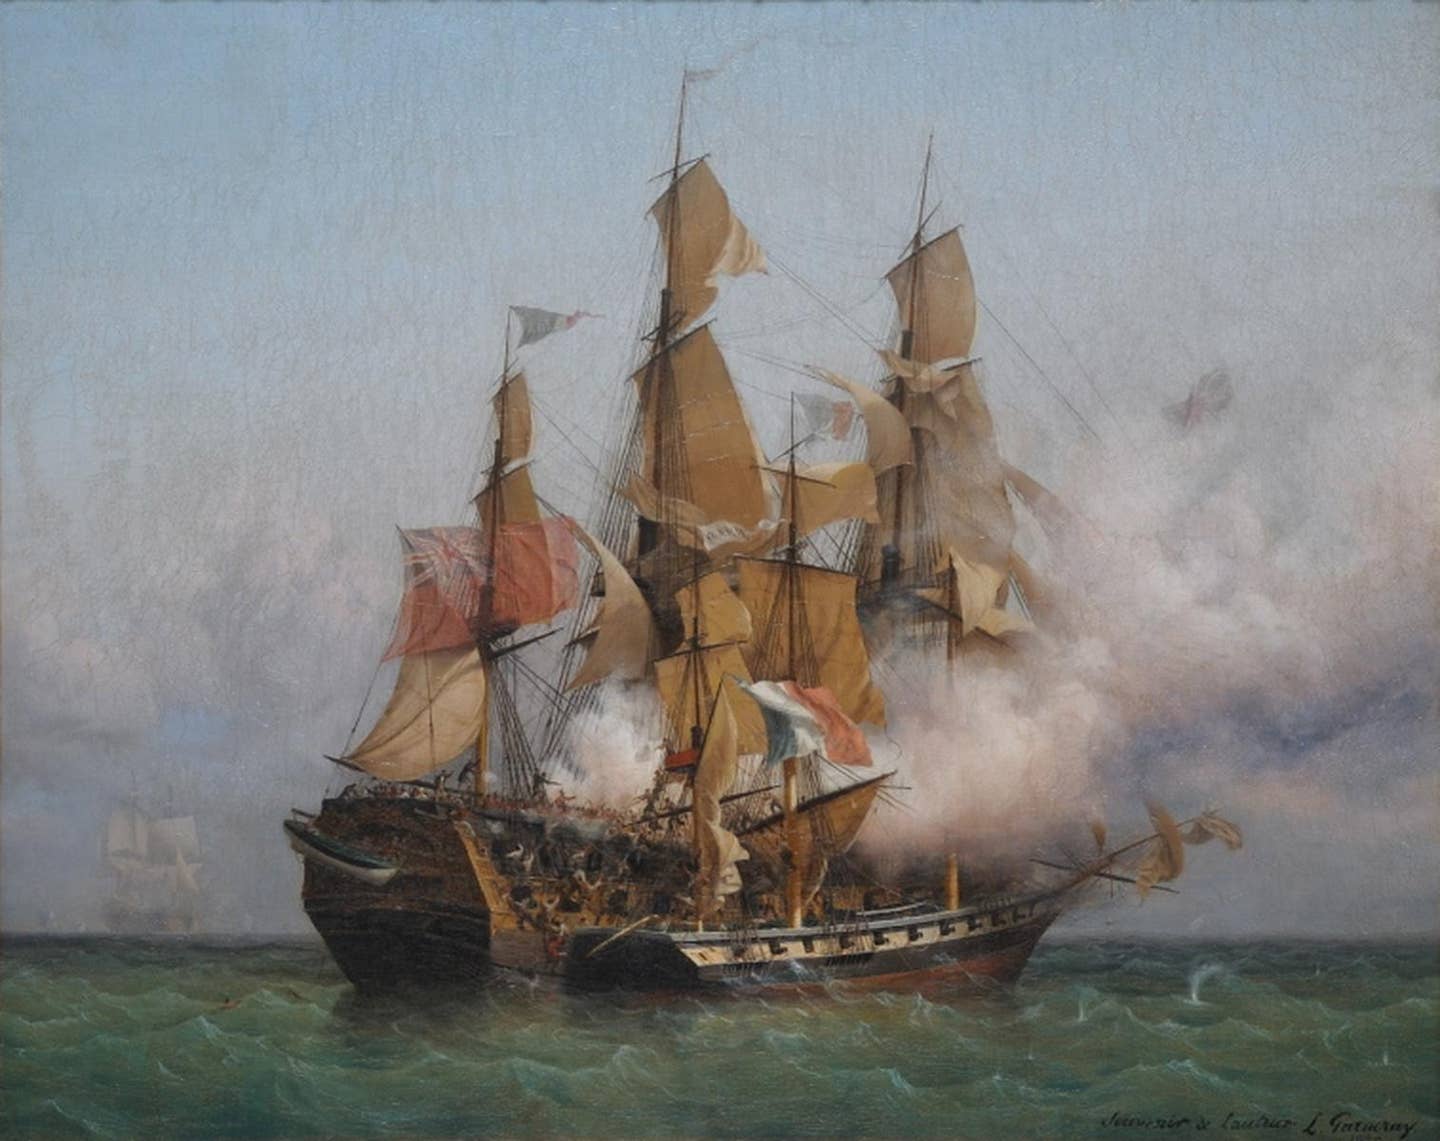 The&nbsp;<em>Kent</em>&nbsp;(left), belonging to the East India Company, battles the&nbsp;<em>Confiance</em>, a privateer vessel commanded by&nbsp;French corsair&nbsp;Robert Surcouf&nbsp;in October 1800, as depicted in a painting by&nbsp;Ambroise Louis Garneray.